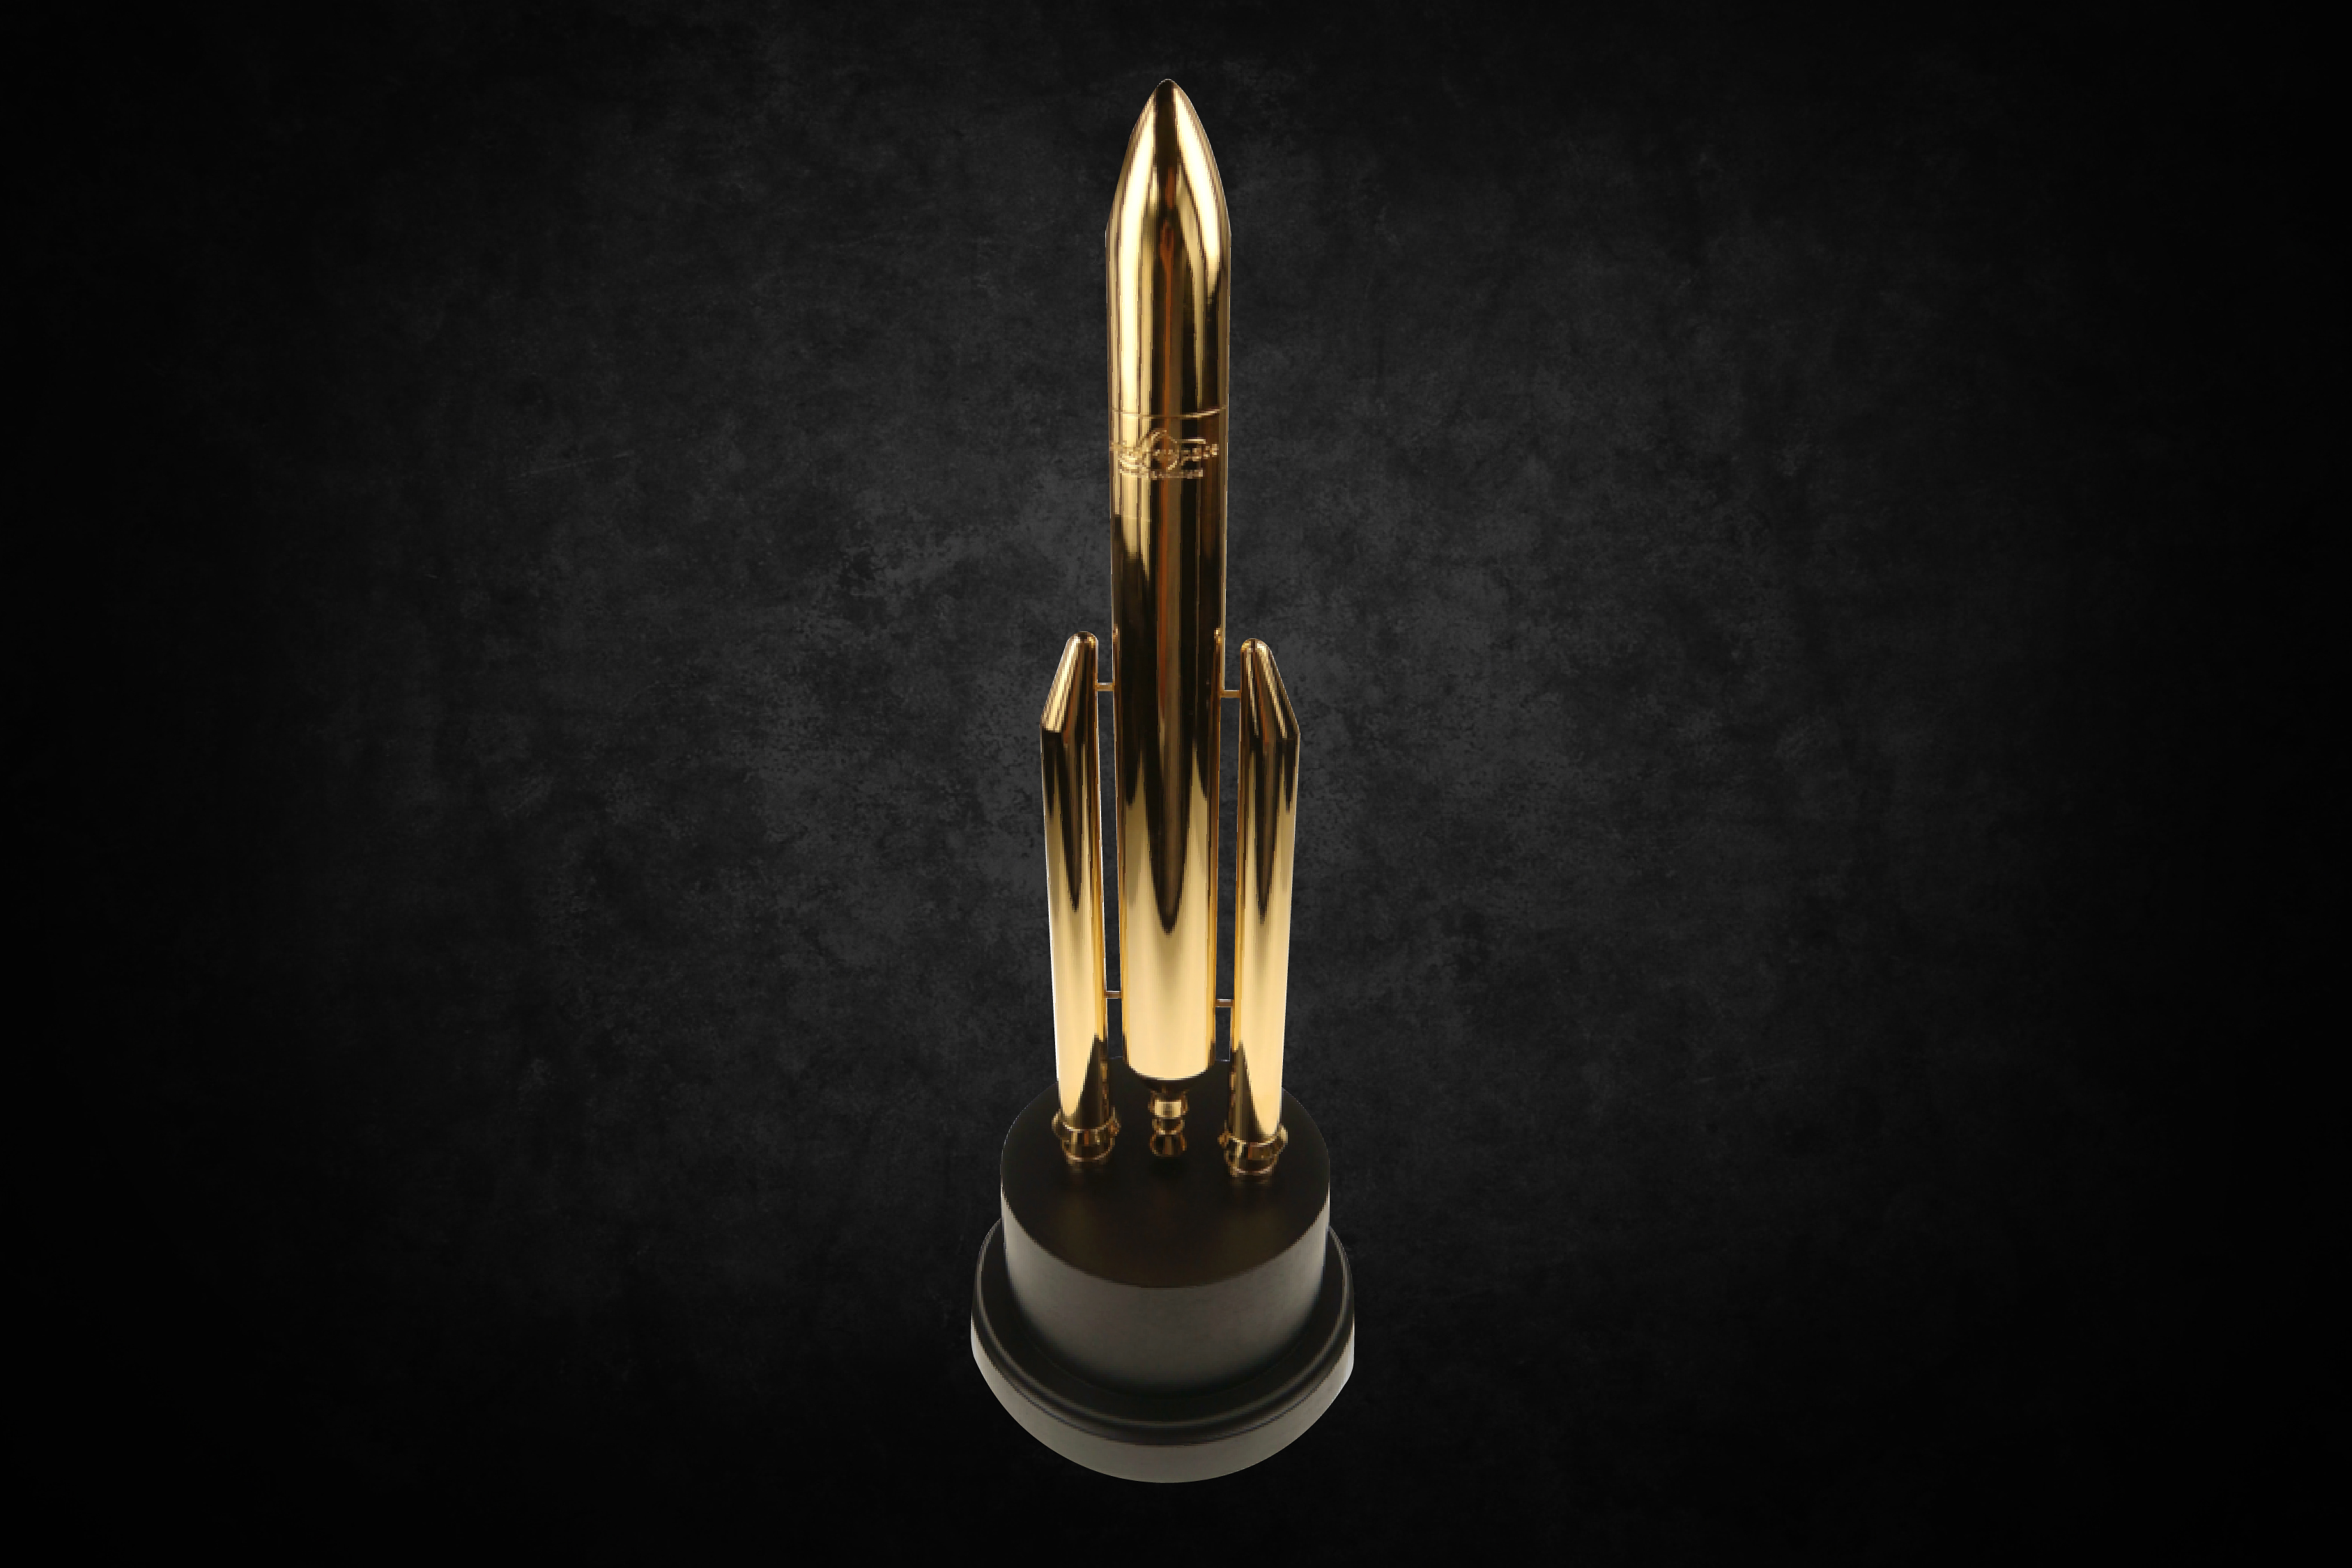 Arianespace Stellar Award, a high-end metal form modeled after the Ariane 5 Rocket and plated in 24k gold